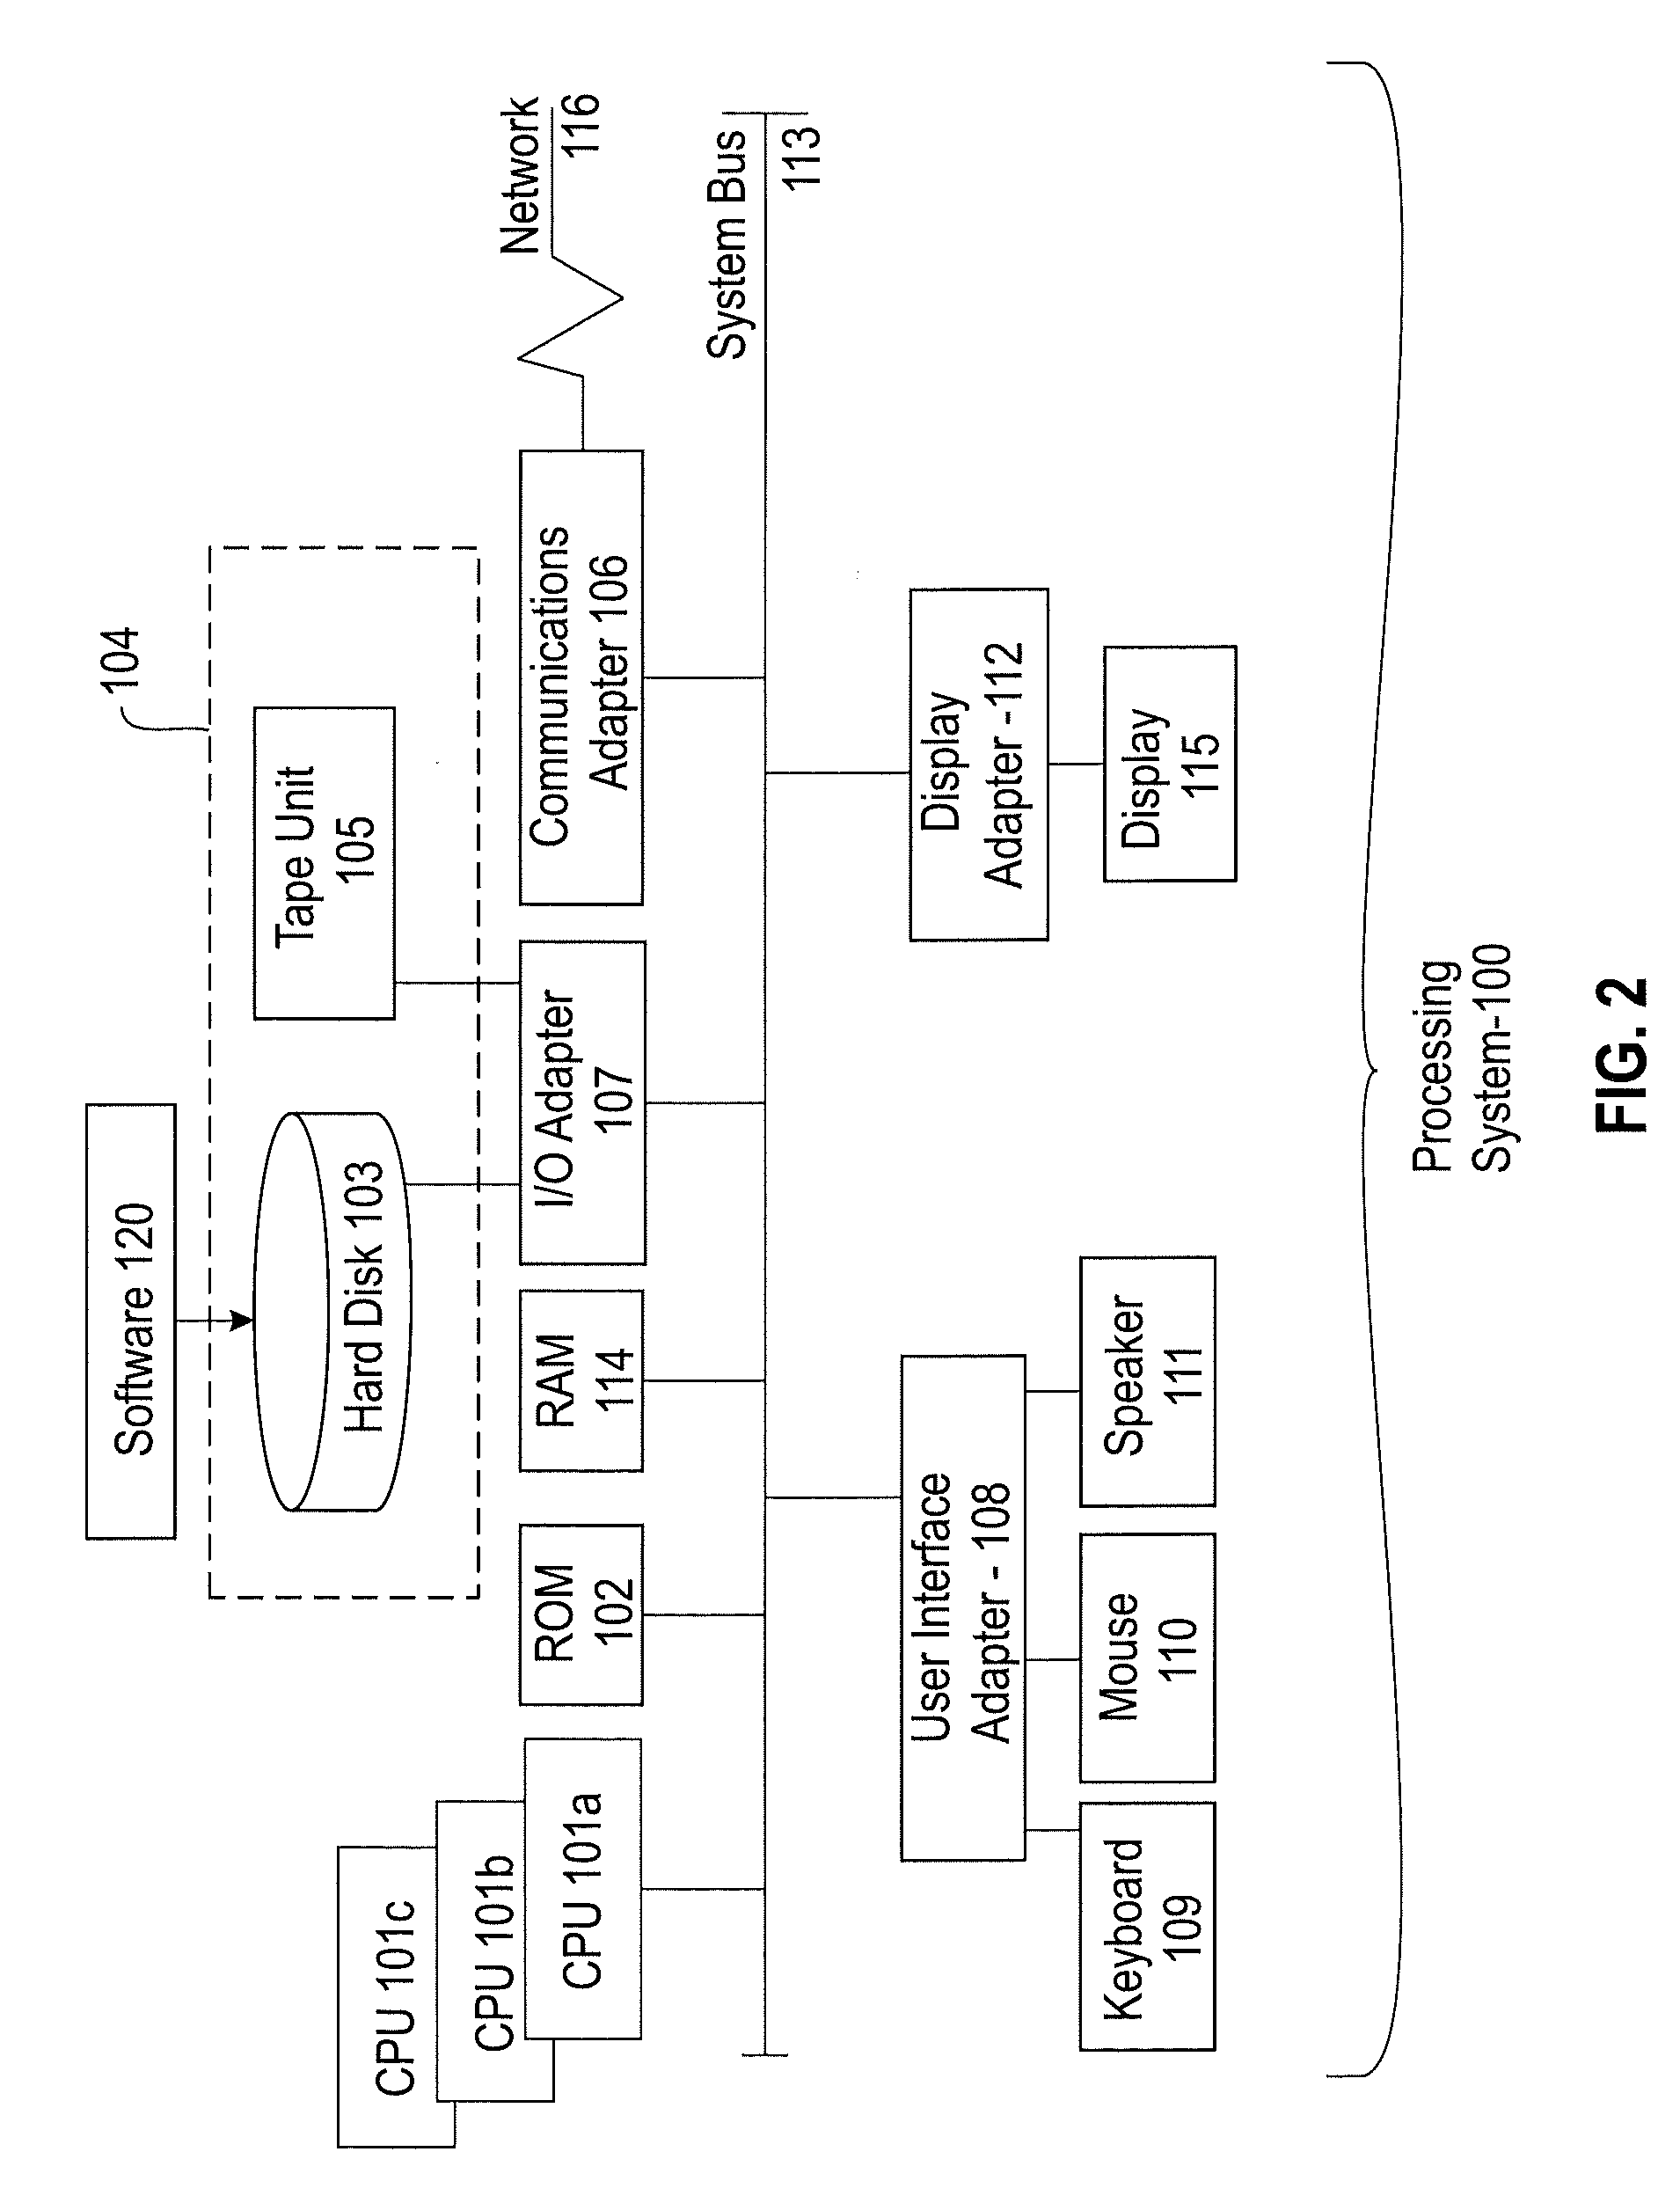 Computer program product,  system and method for providing social services to individuals by employing bi-objective optimization